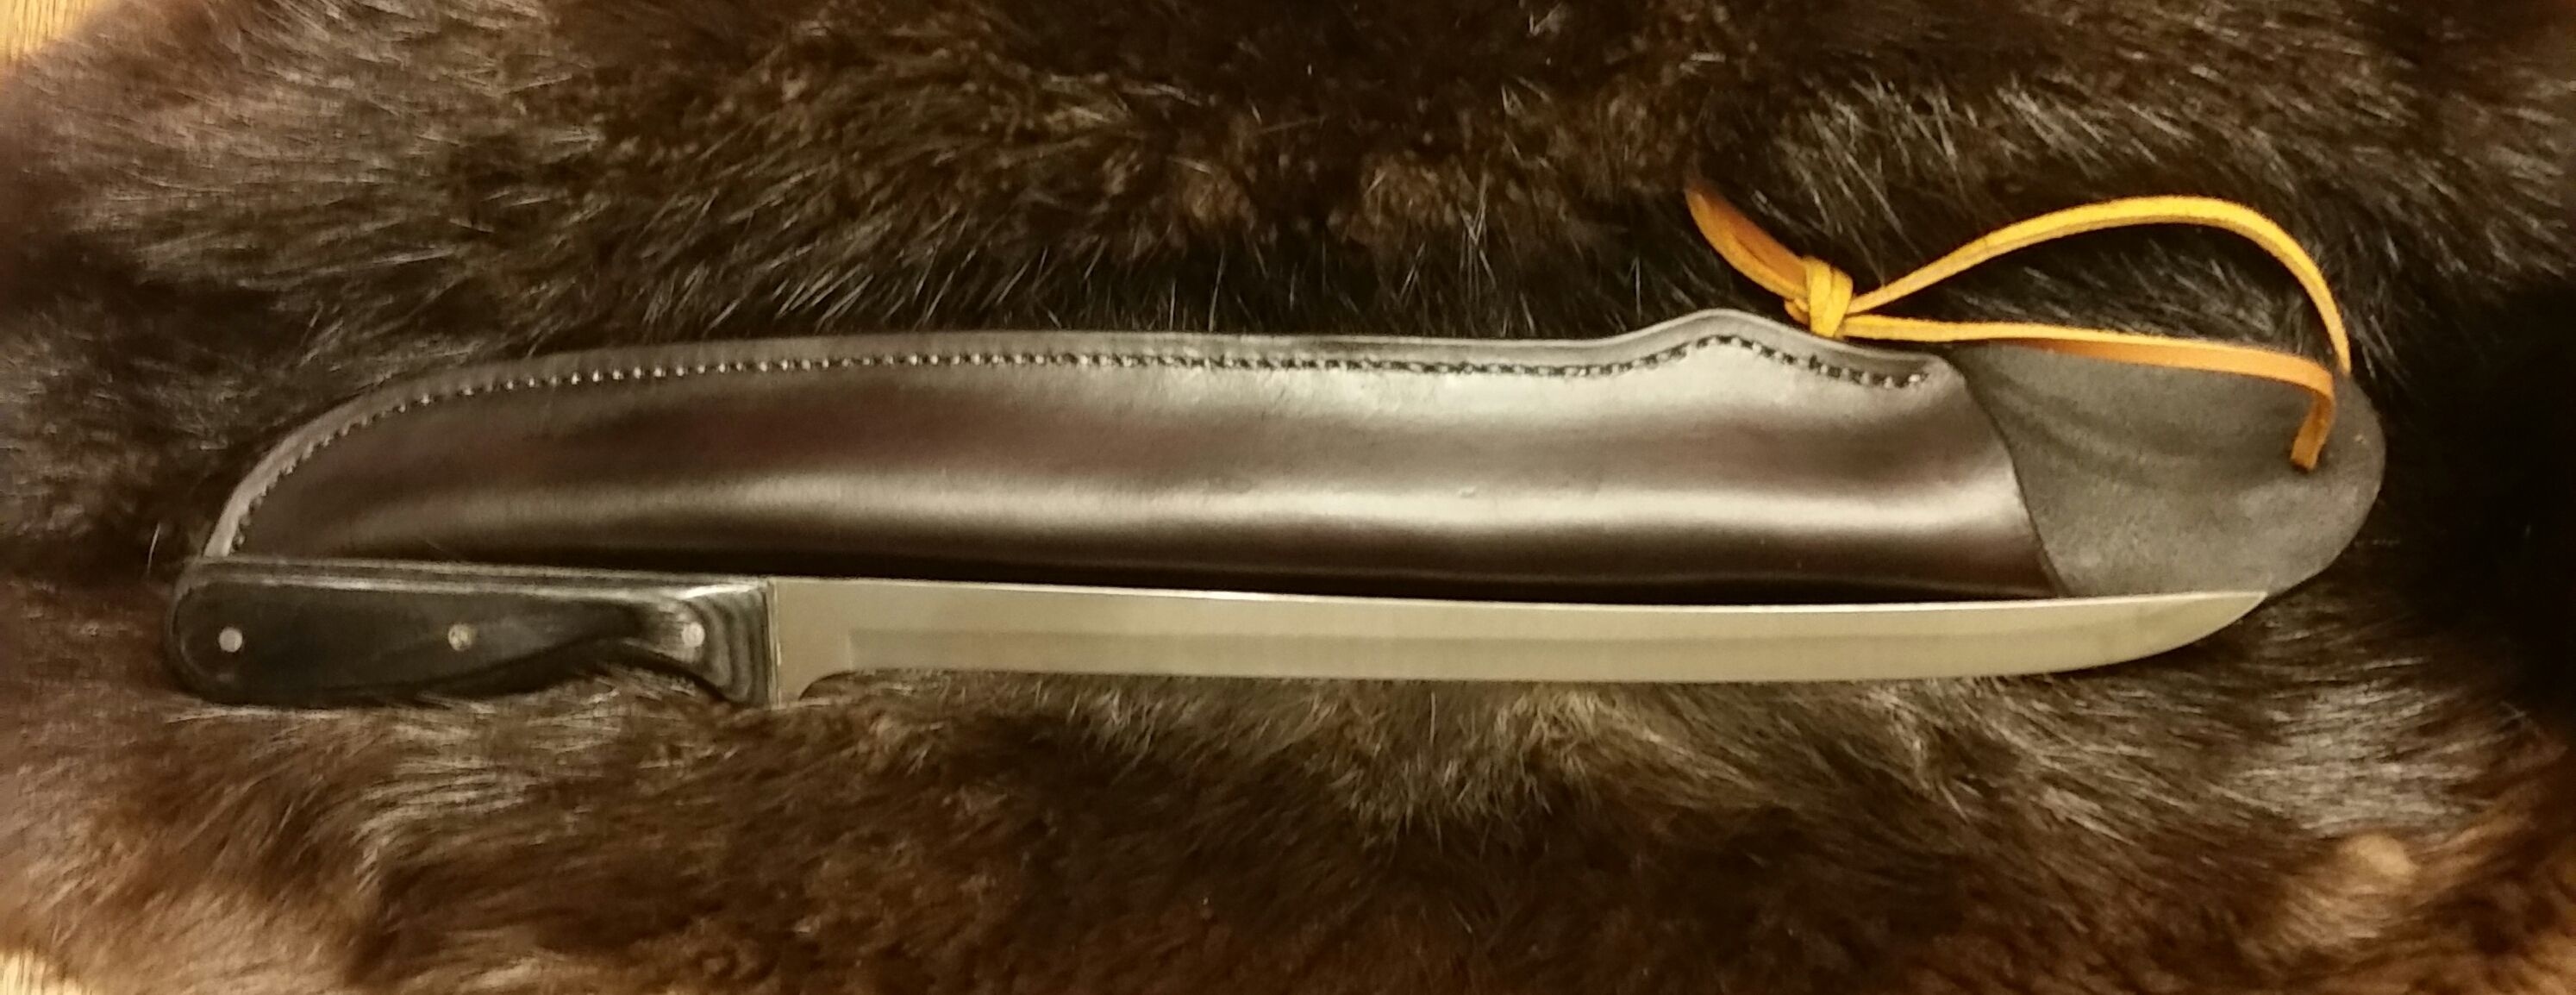 Long Filet Knife with Hand Stitched Leather Sheath...  $130.00